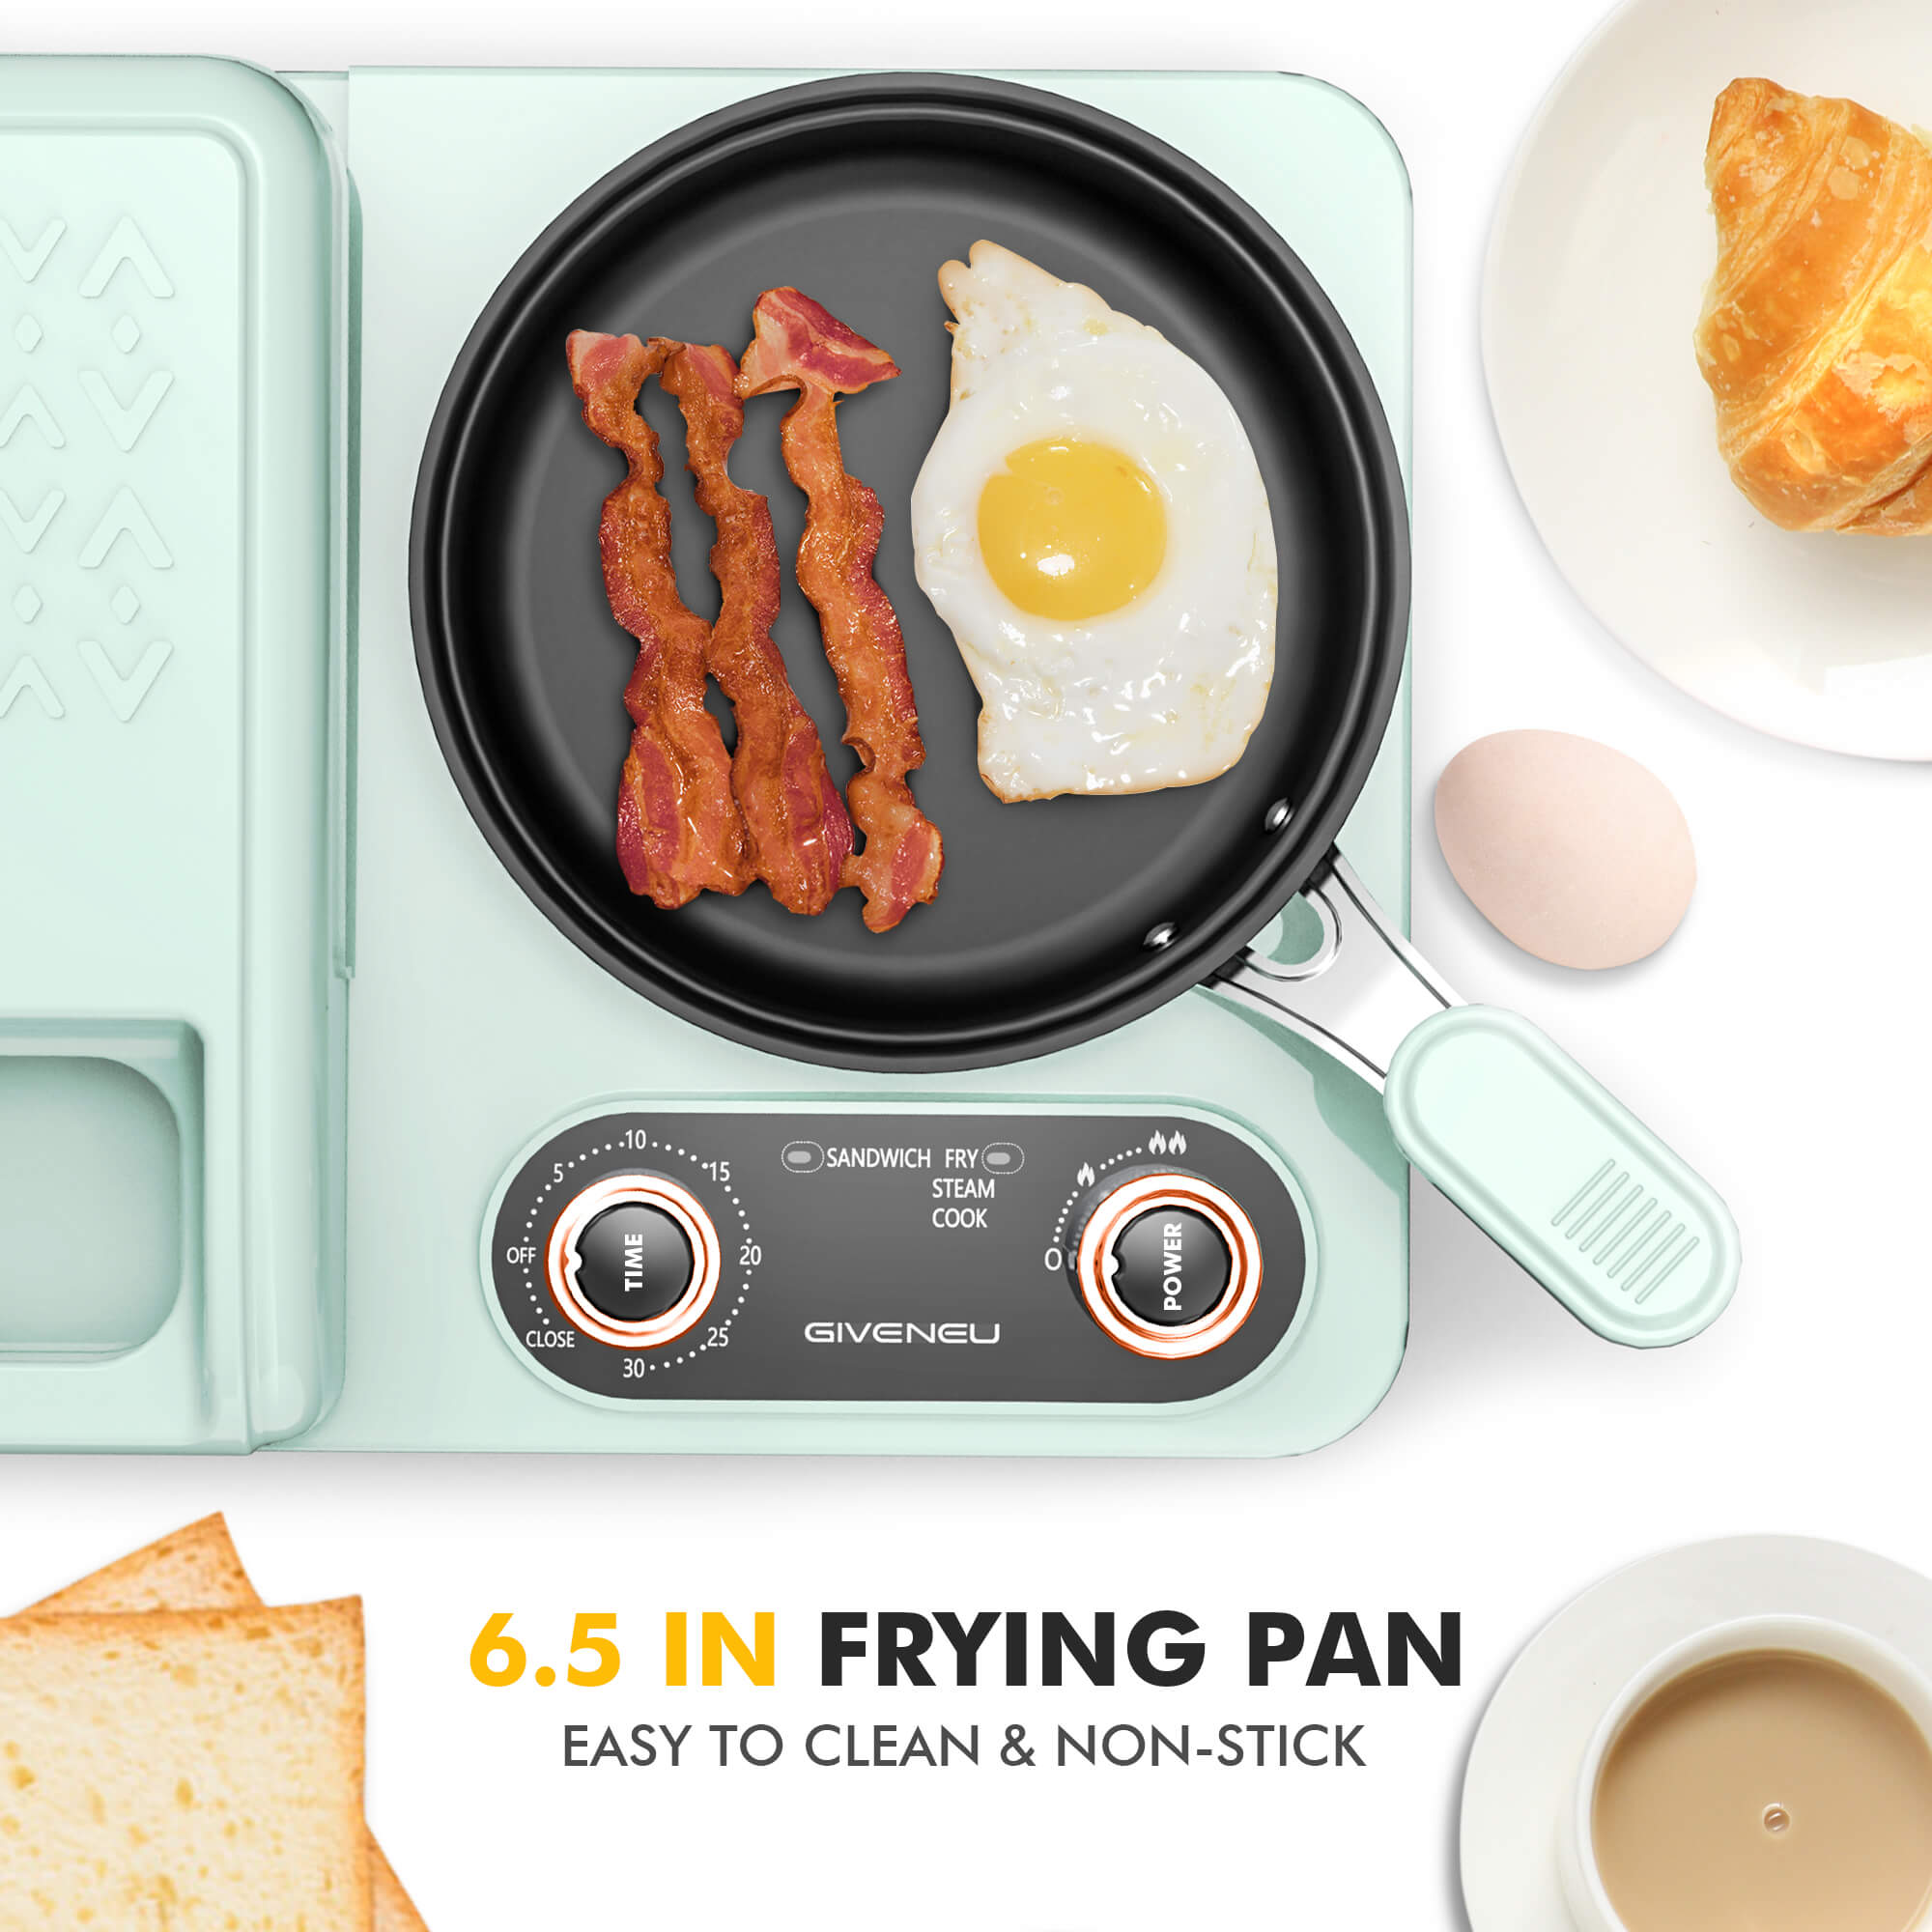 Relaxing with a breakfast-maker - CNET